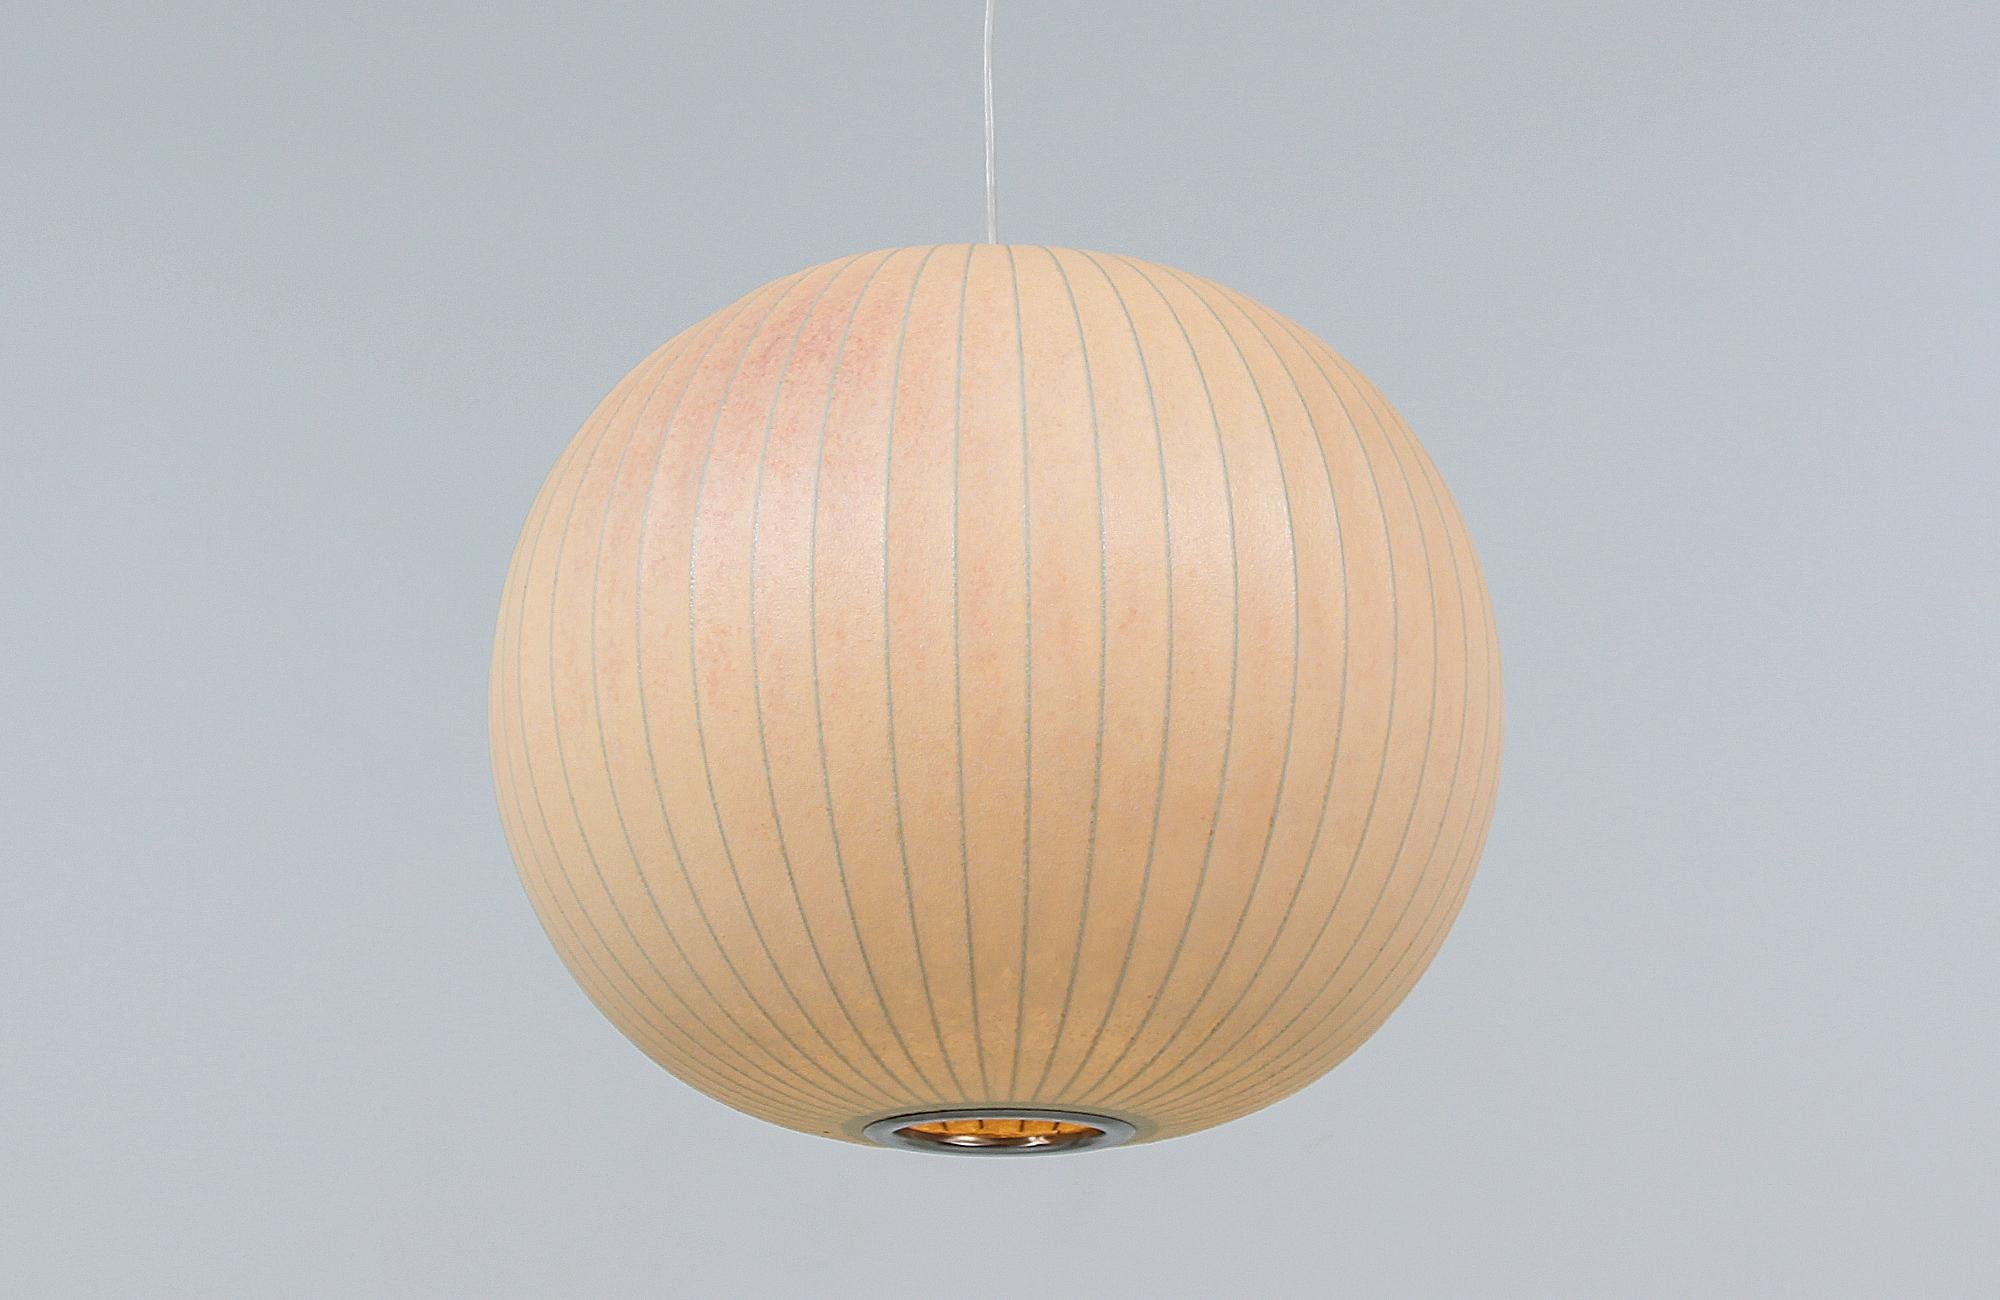 Iconic modern hanging Bubble Lamp designed by George Nelson for Howard Miller in the United States, circa 1960s. Influenced by Swedish hanging lamps and ship decks, George Nelson’s Bubble lamp collection has become an icon amongst Mid-Century Modern